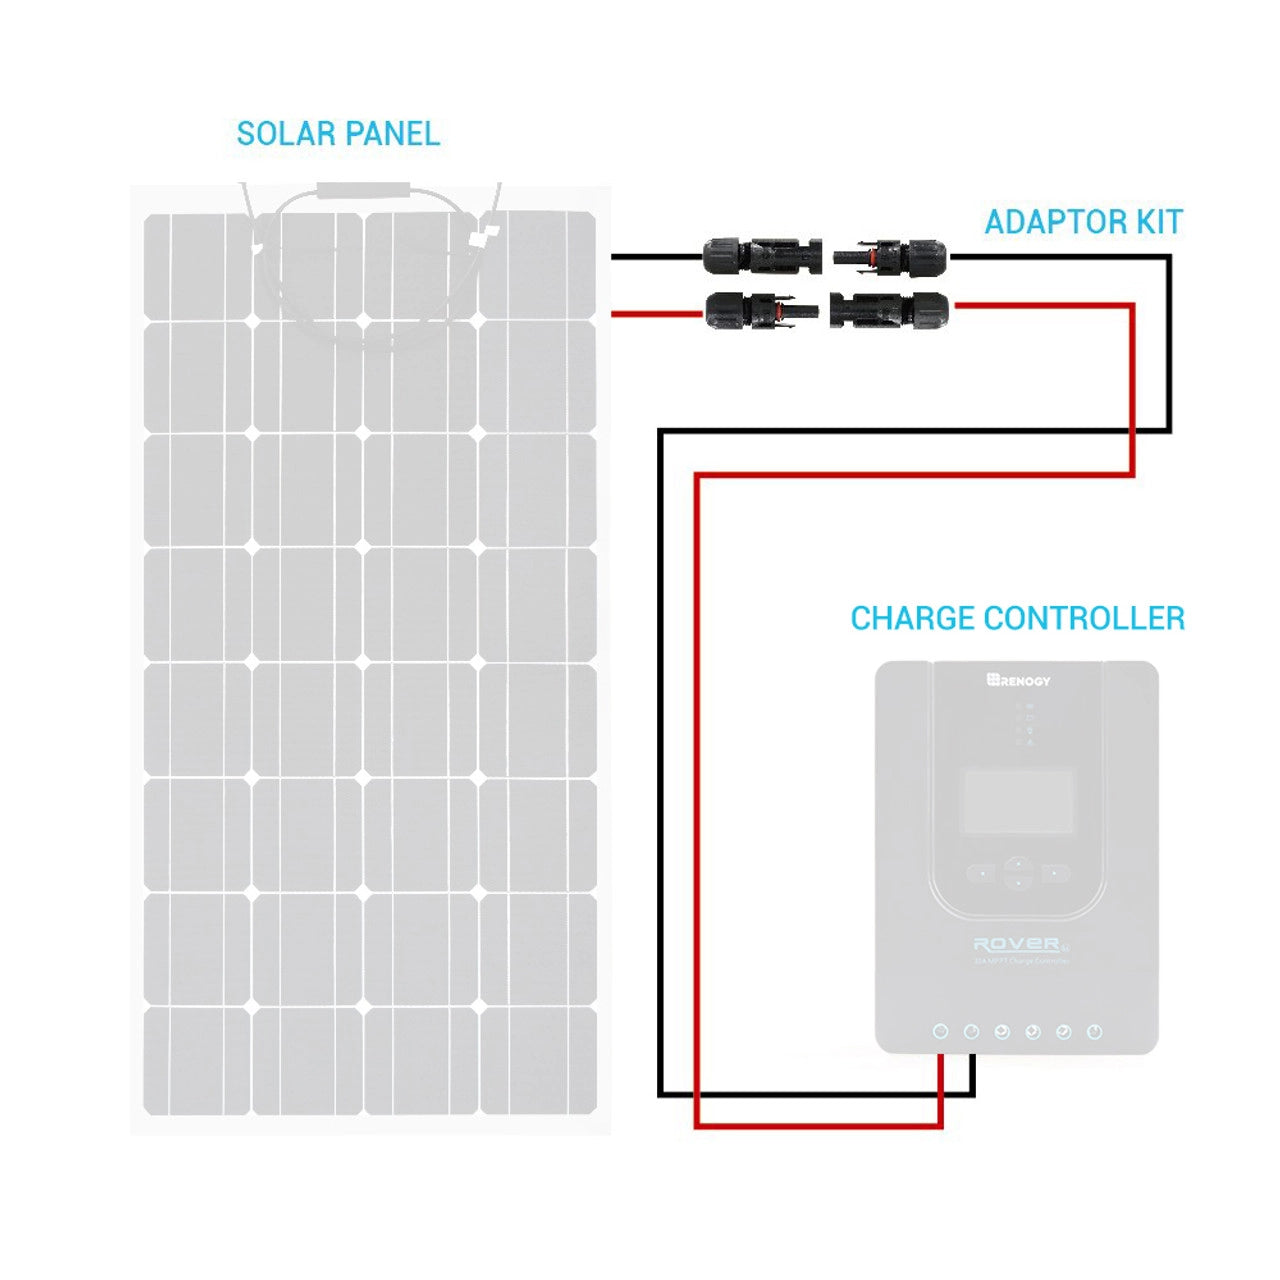 Solar Panel to Charge Controller Adaptor Kit solar panel charge controller